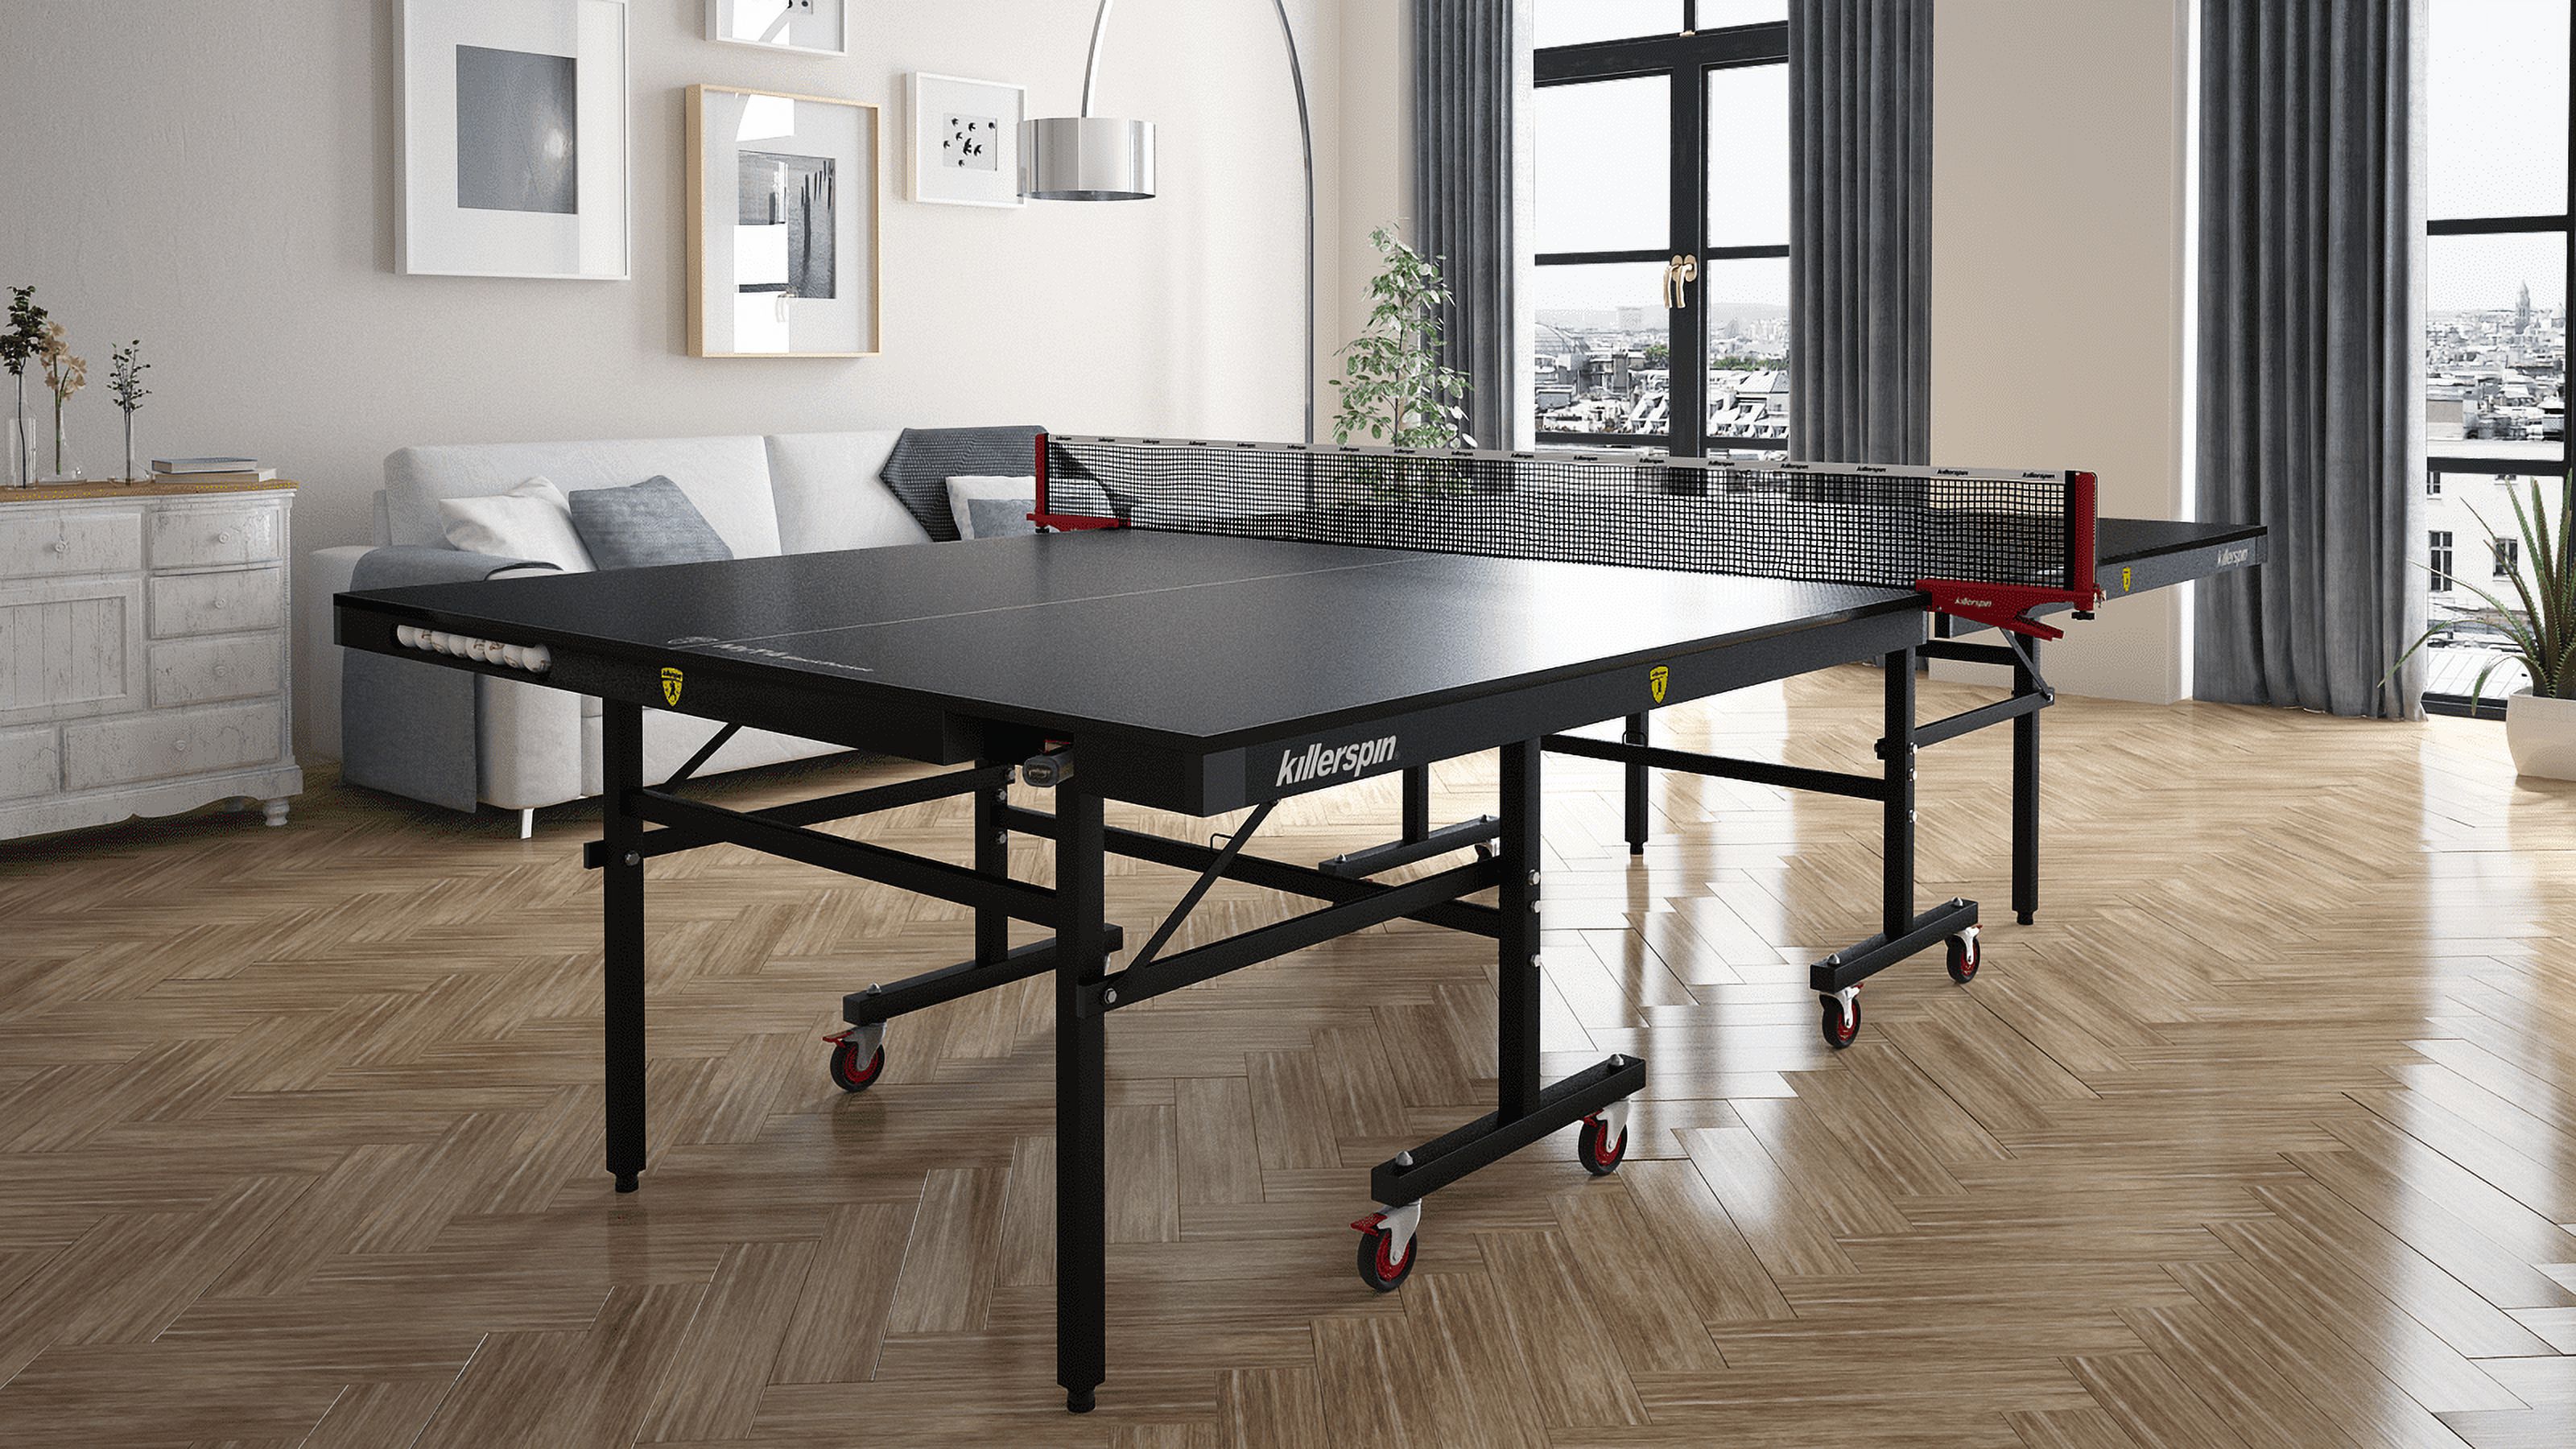 Killerspin MyT4 BlackPocket, ITTF Offcial Size, Folding Indoor Tennis Table, 9' x 5' x 2.5" - image 2 of 9